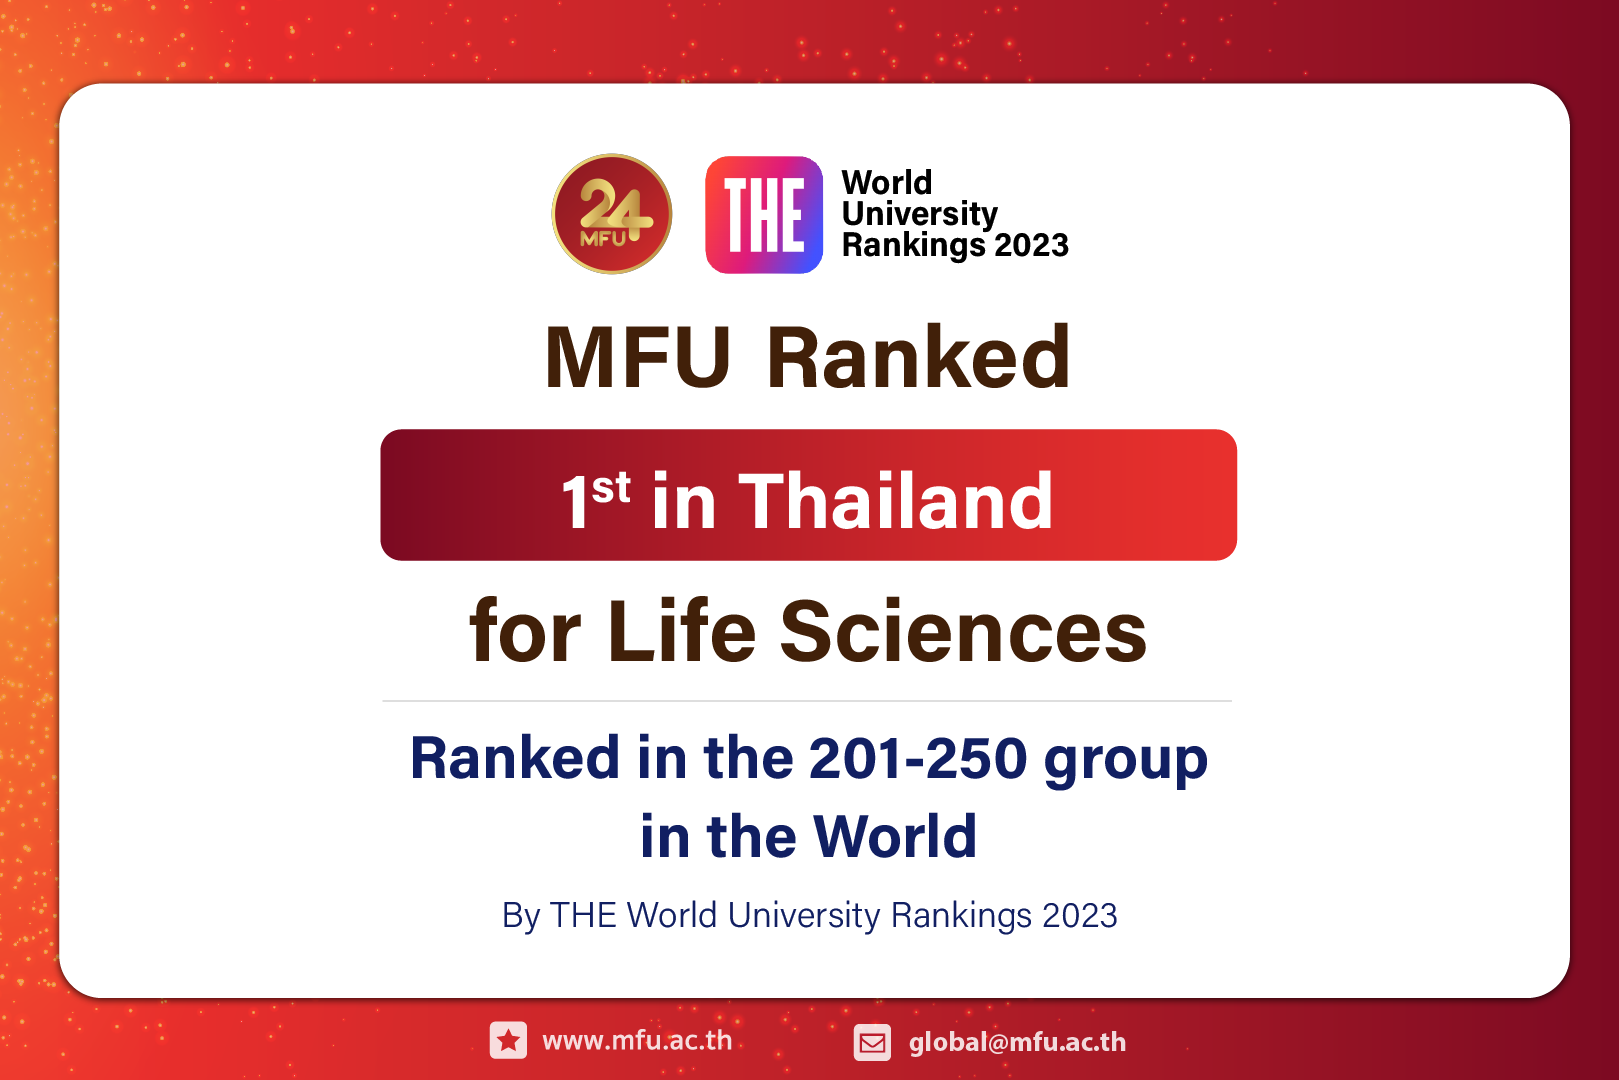 MFU Ranked 1st in Thailand for Life Sciences Subject